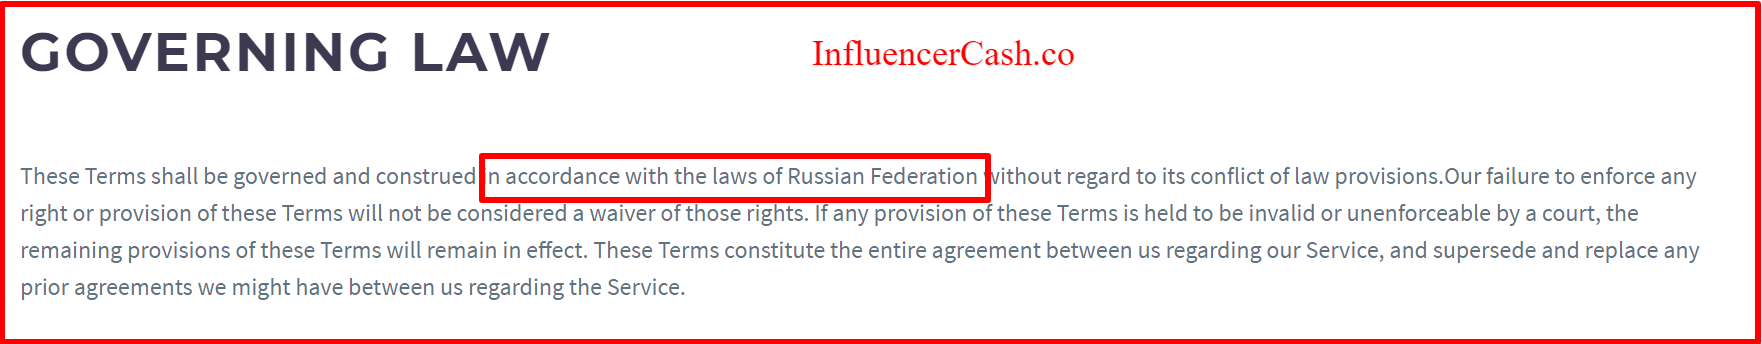 Terms and conditions influencercash